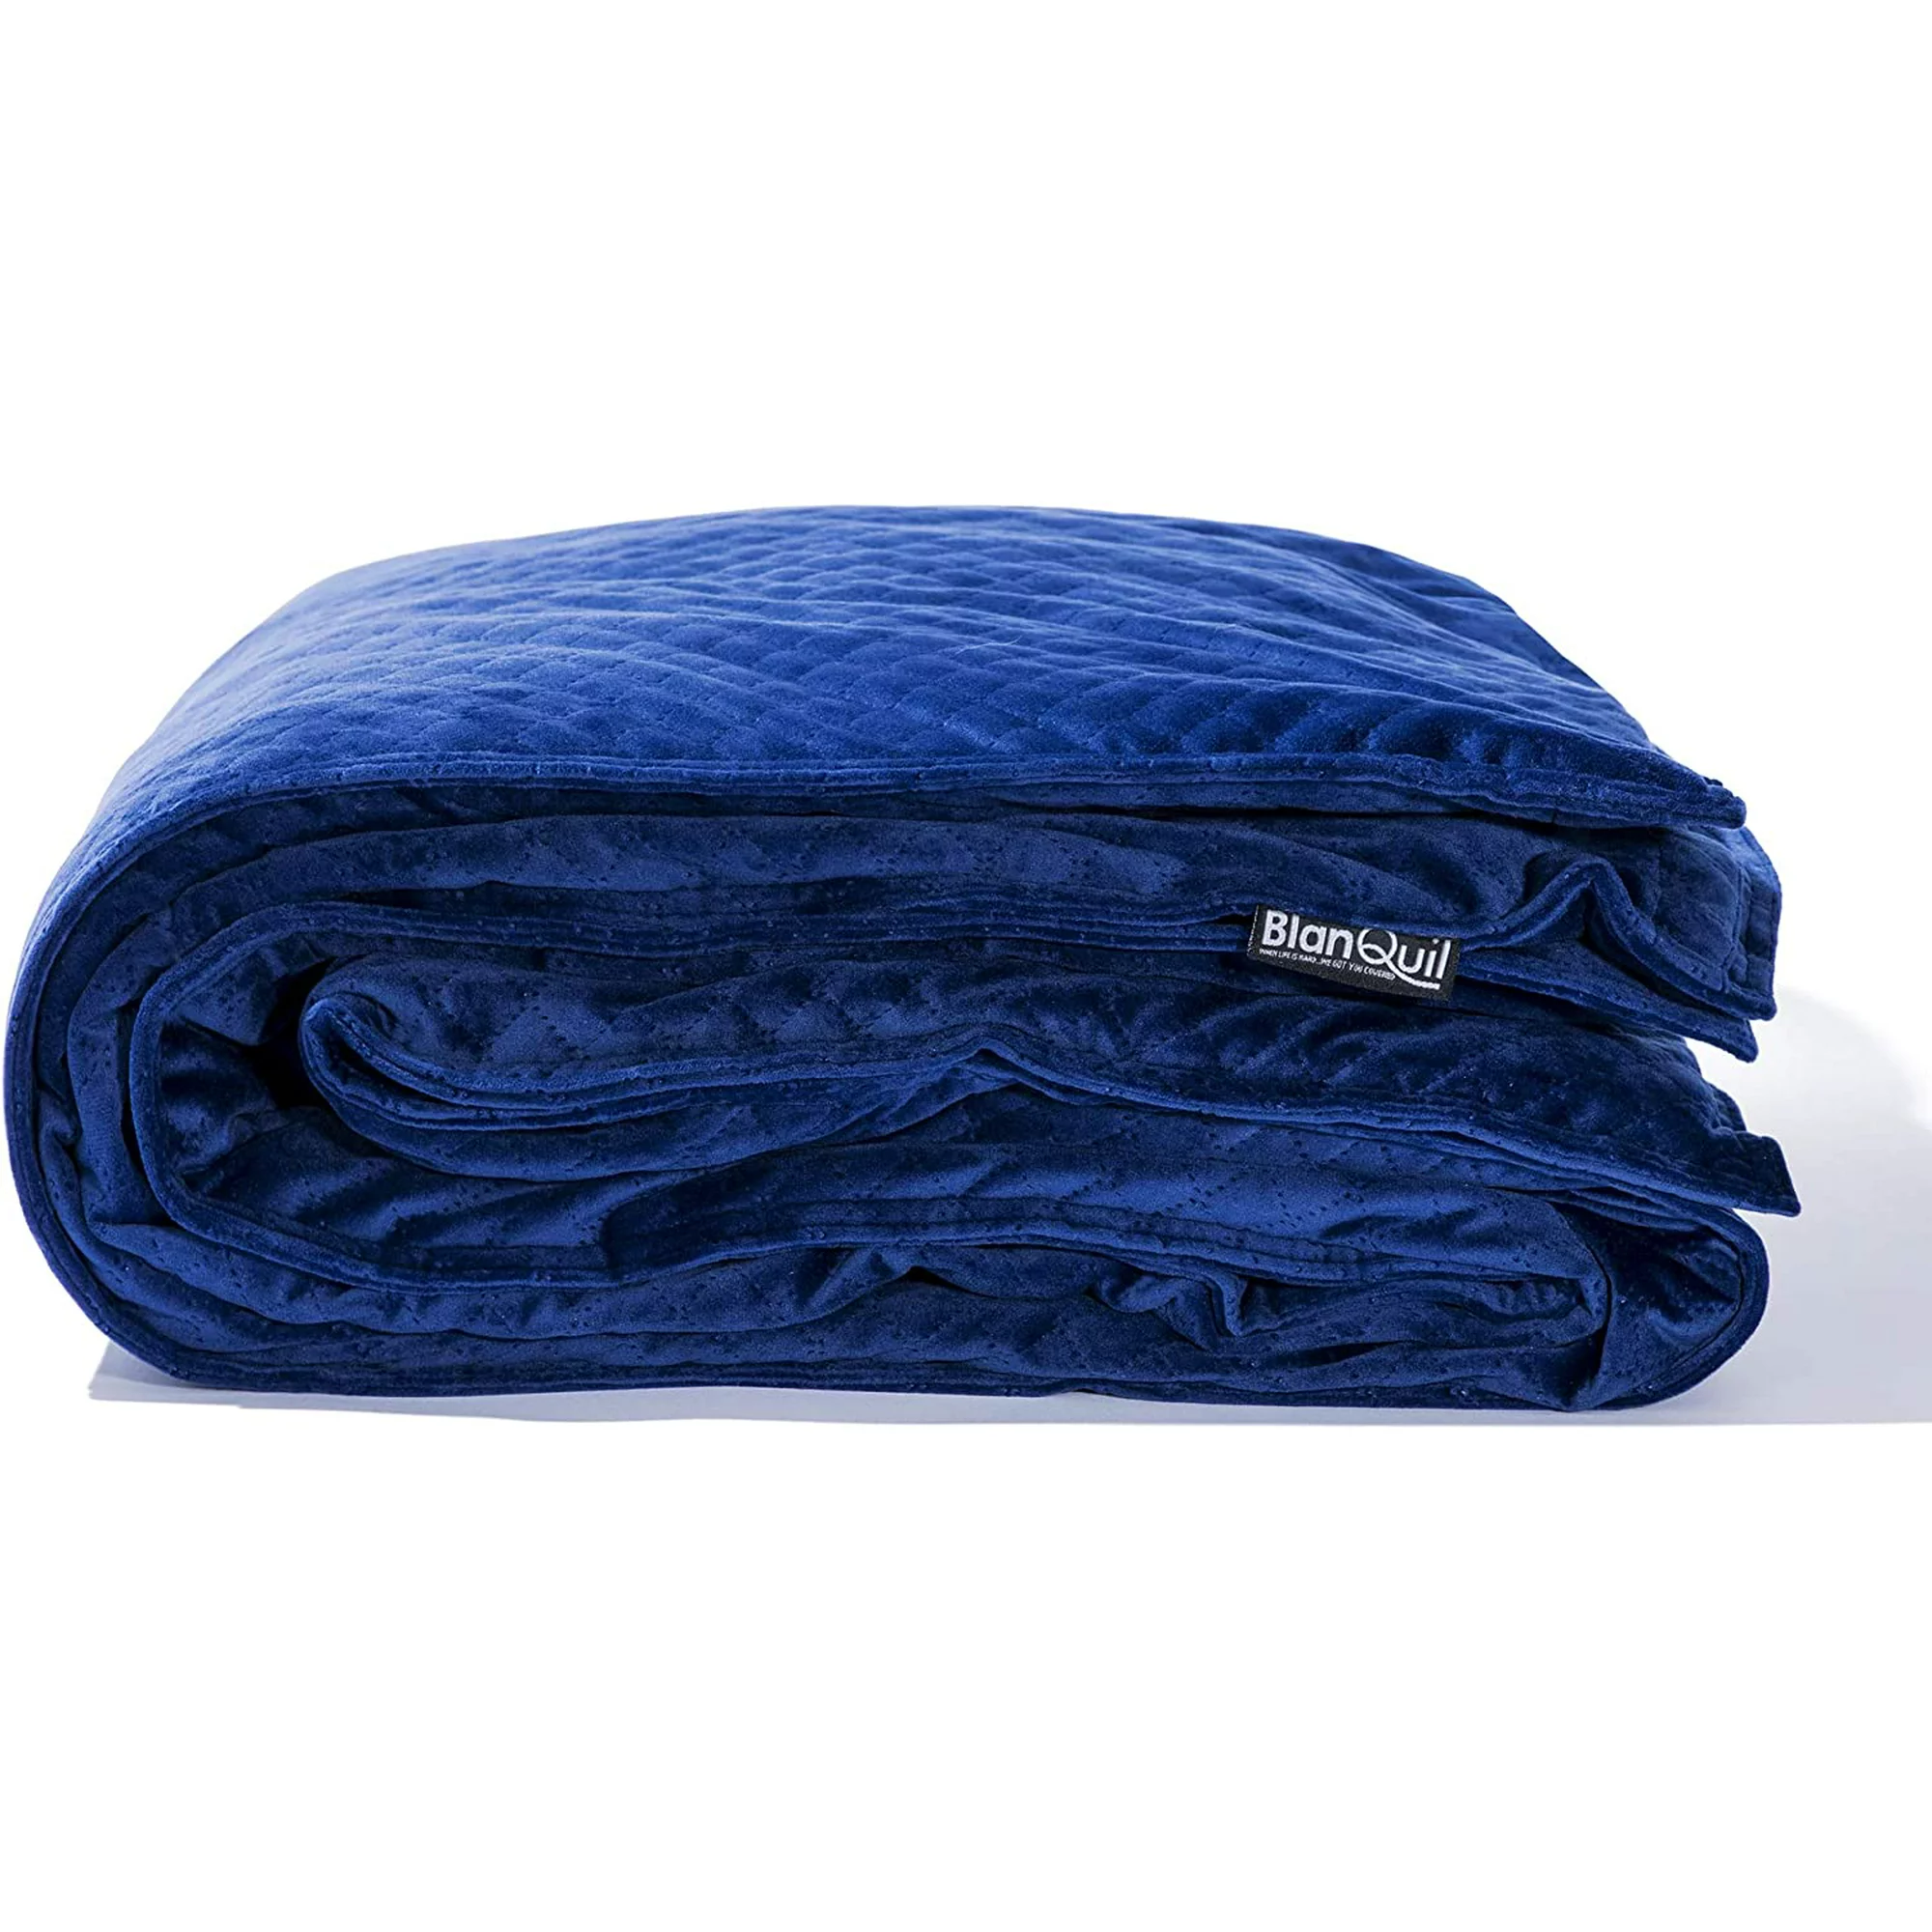 BlanQuil Weighted Blanket 20lb | walmart